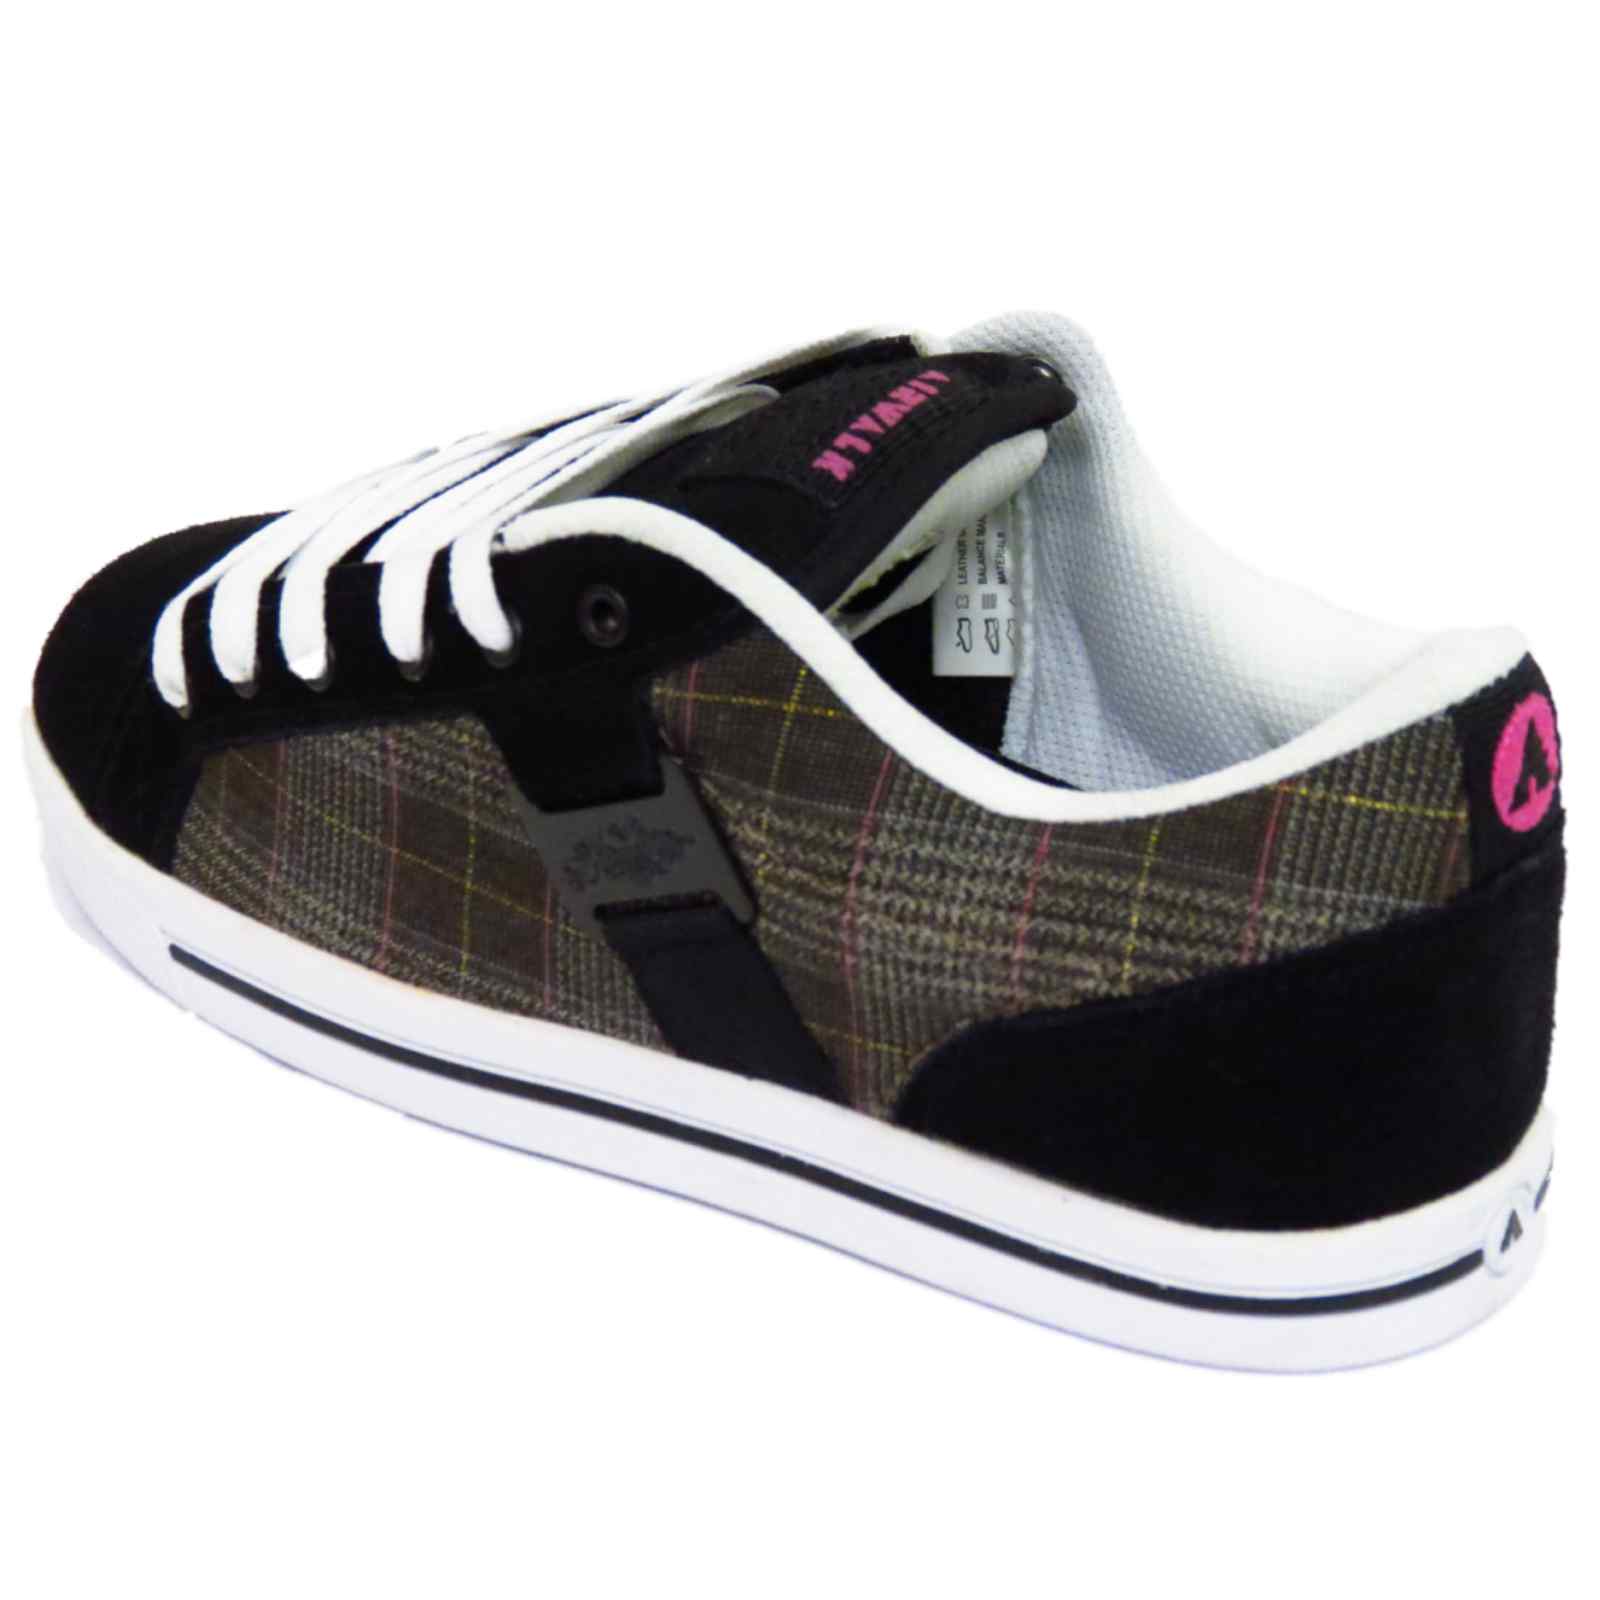 SKATER TRAINERS CASUAL SHOES PUMPS UK 